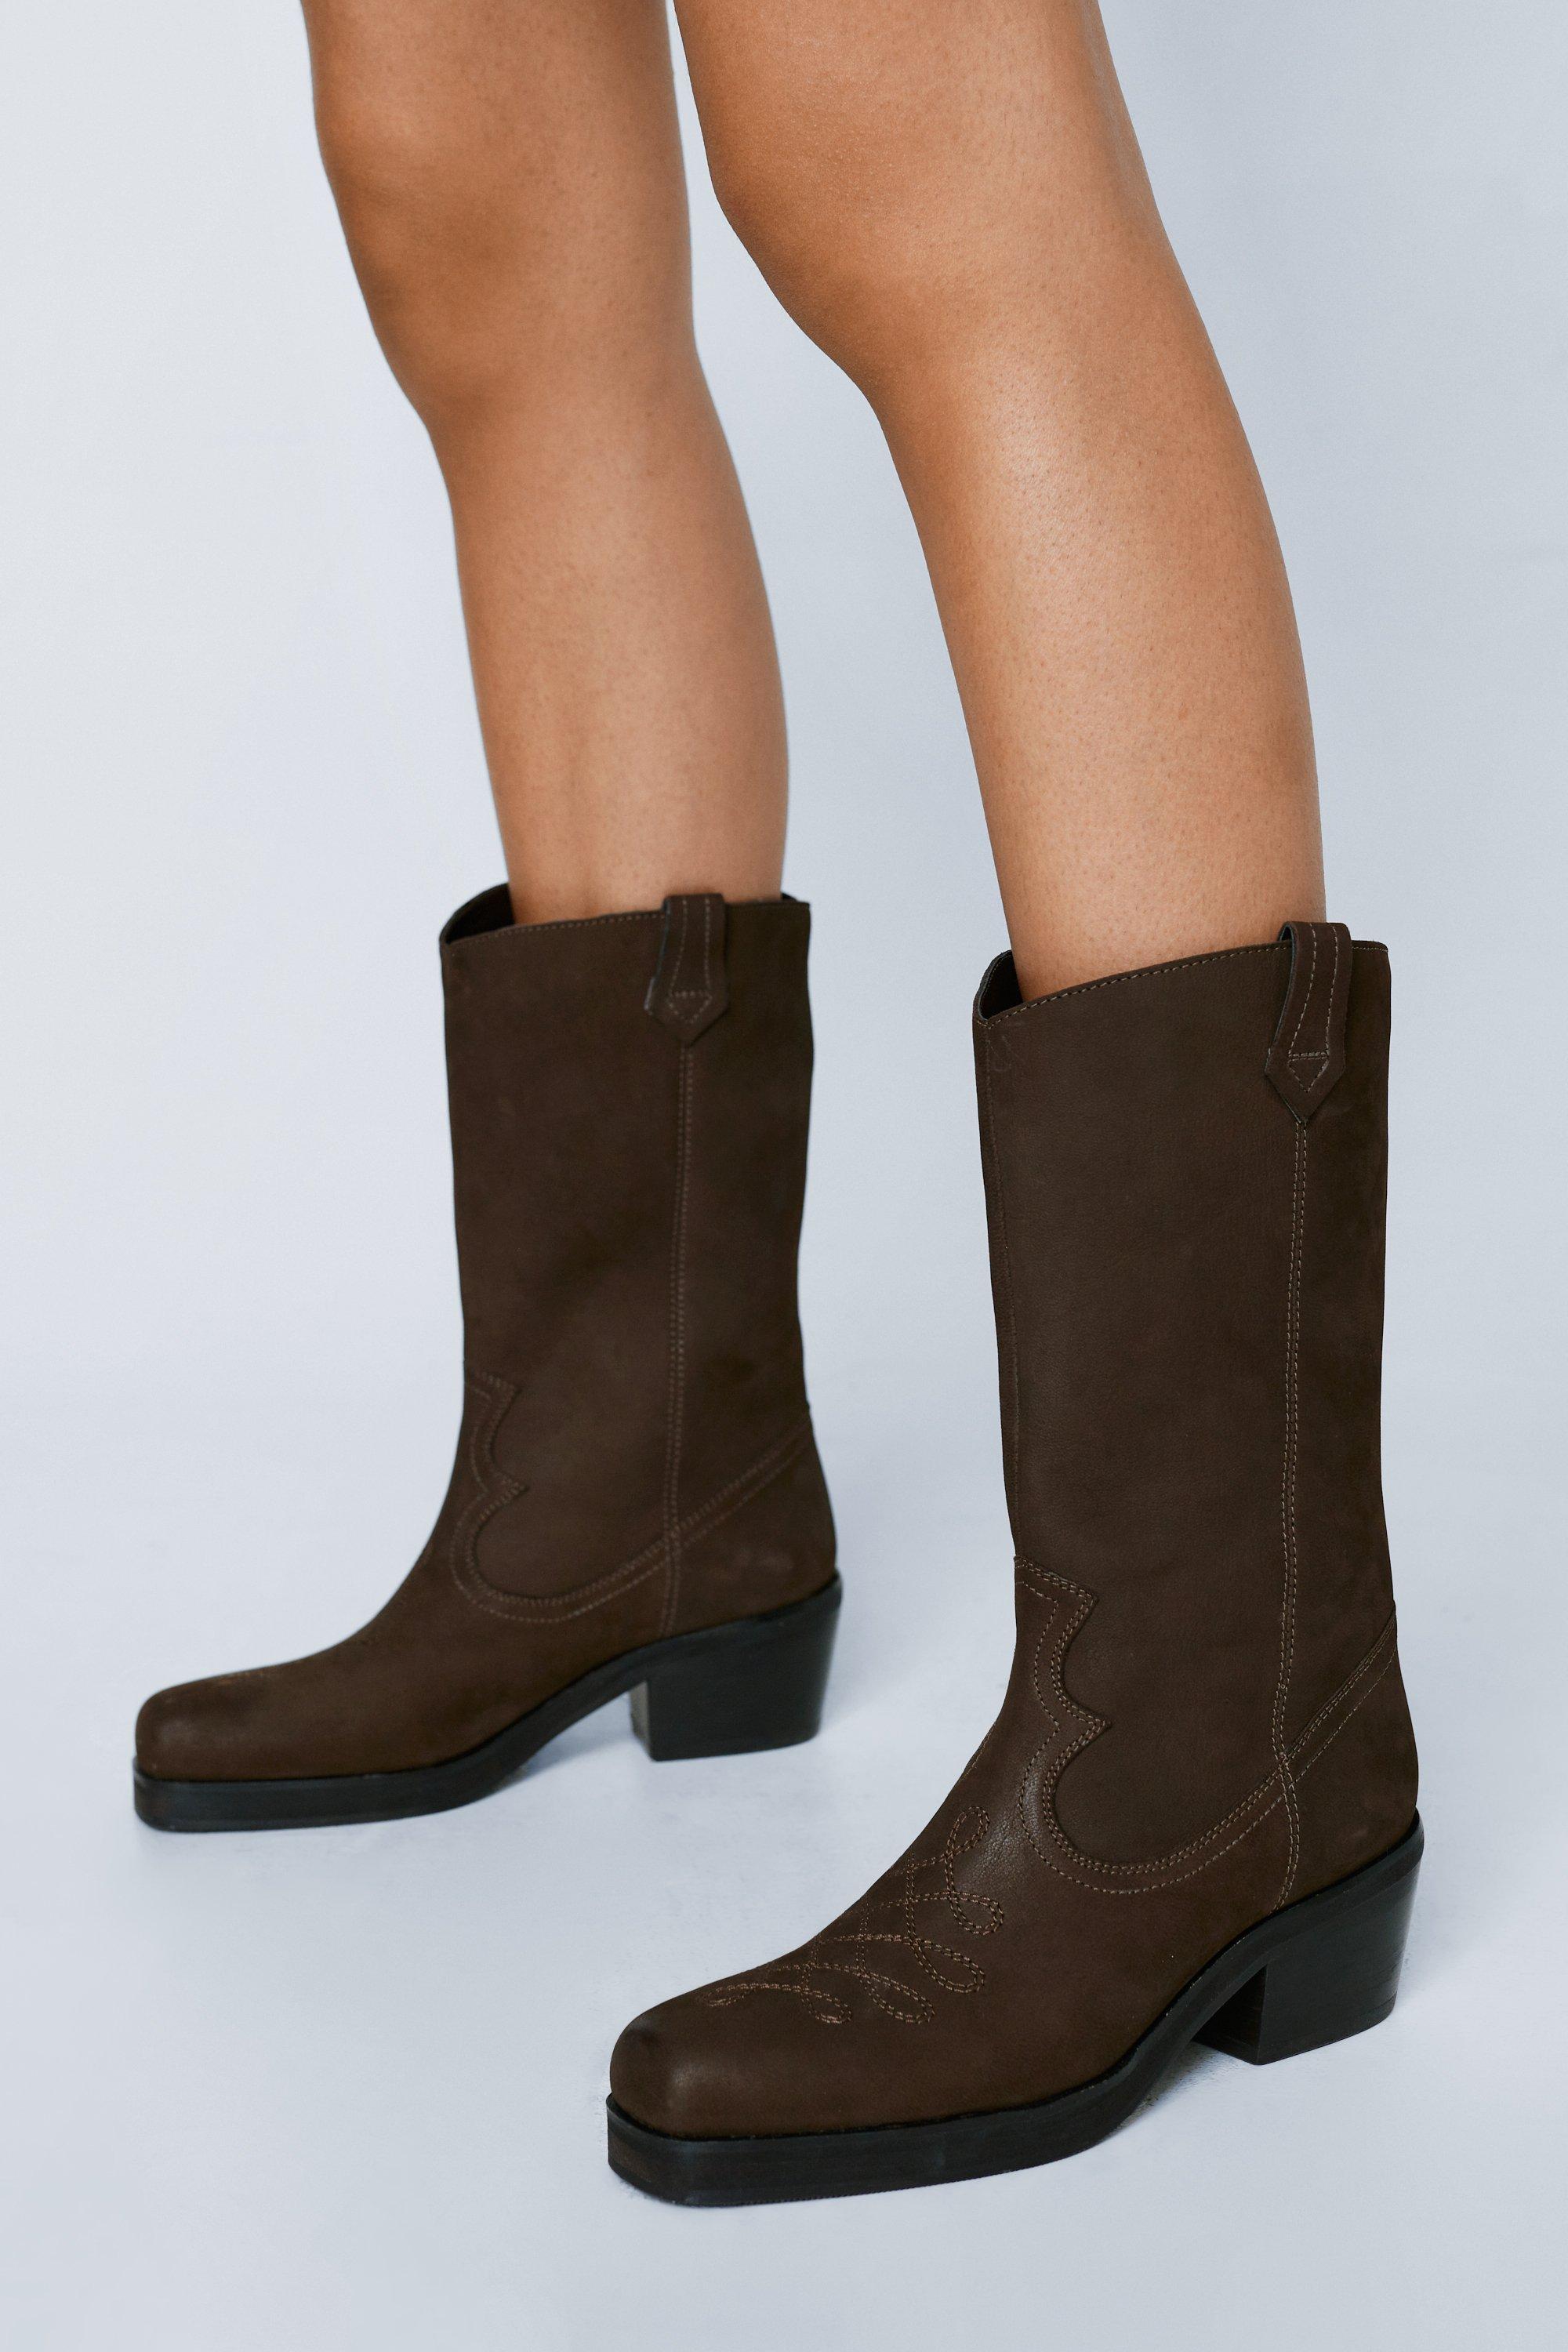 NastyGal Women's Real Leather Square Toe Western Boot|Size: 3|brown